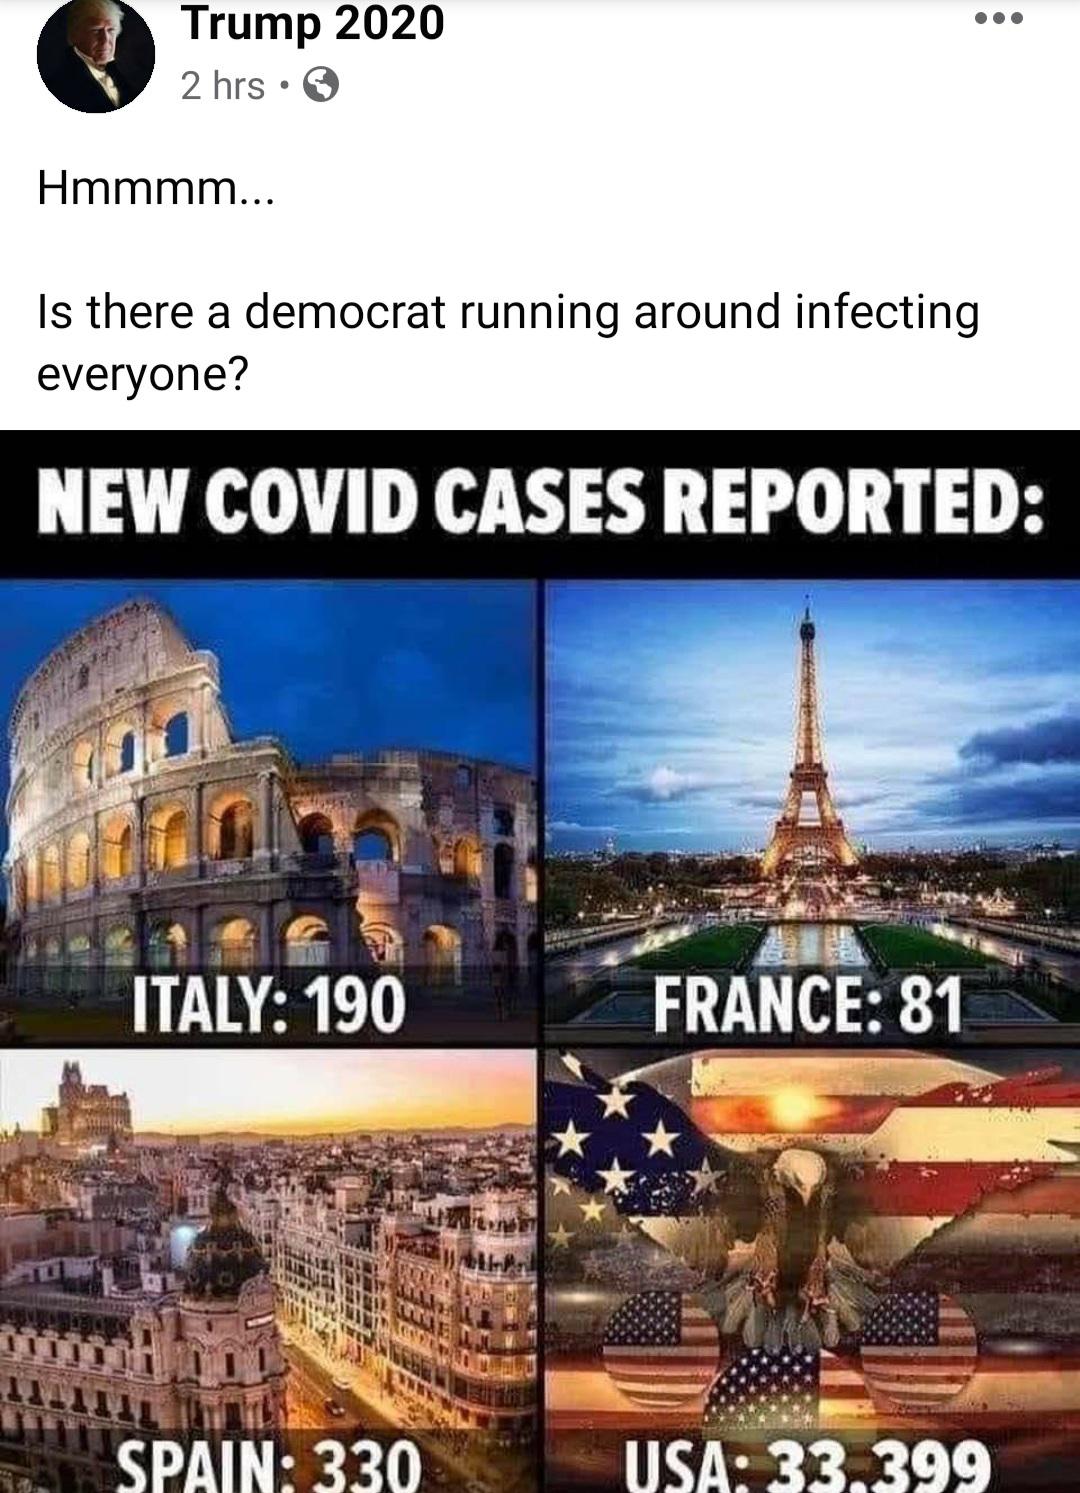 Political, Trump, COVID, Americans, Usa, Spain boomer memes Political, Trump, COVID, Americans, Usa, Spain text: Trump 2020 2 hrs • Hmmmm... Is there a democrat running around infecting everyone? NEW COVID CASES REPORTED: ITALY: 190 FRANCE: 81 